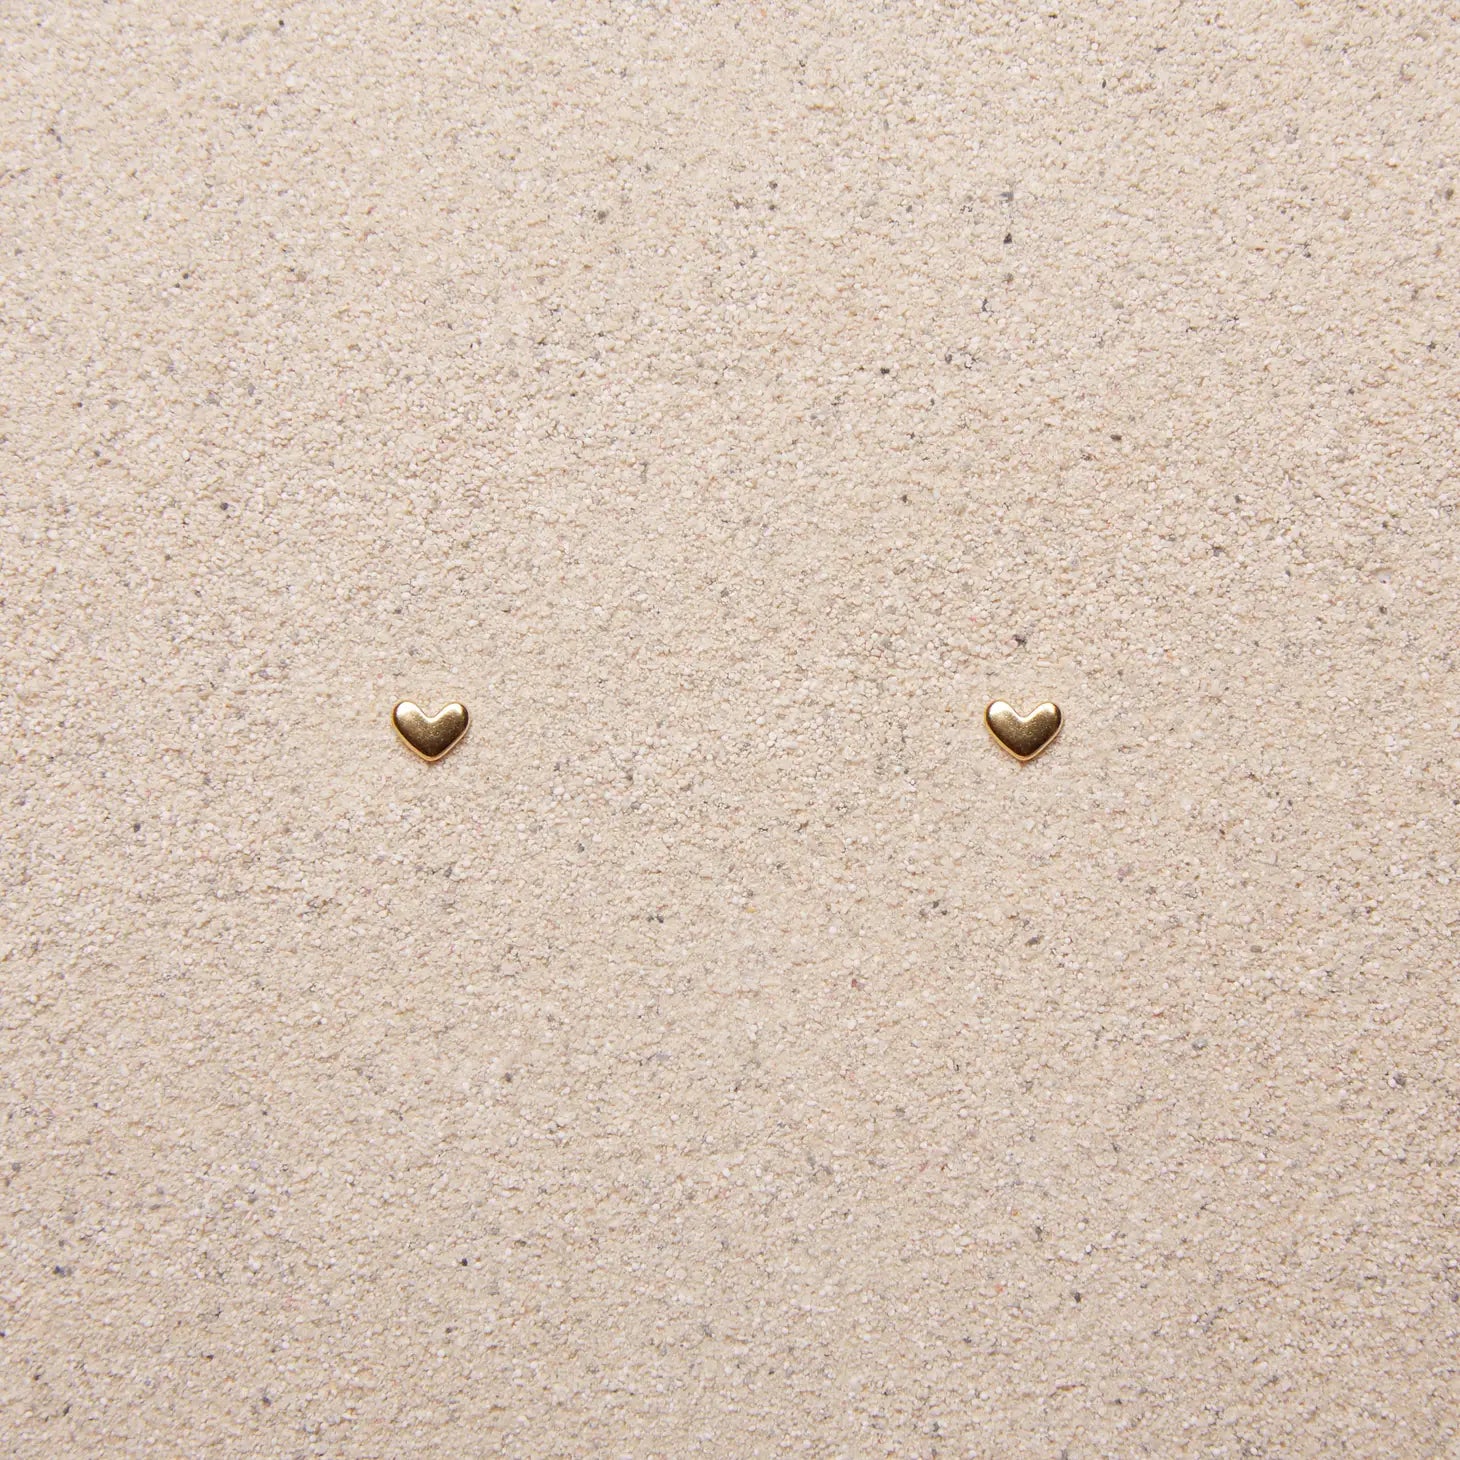 tiny gold heart earrings on a tan background